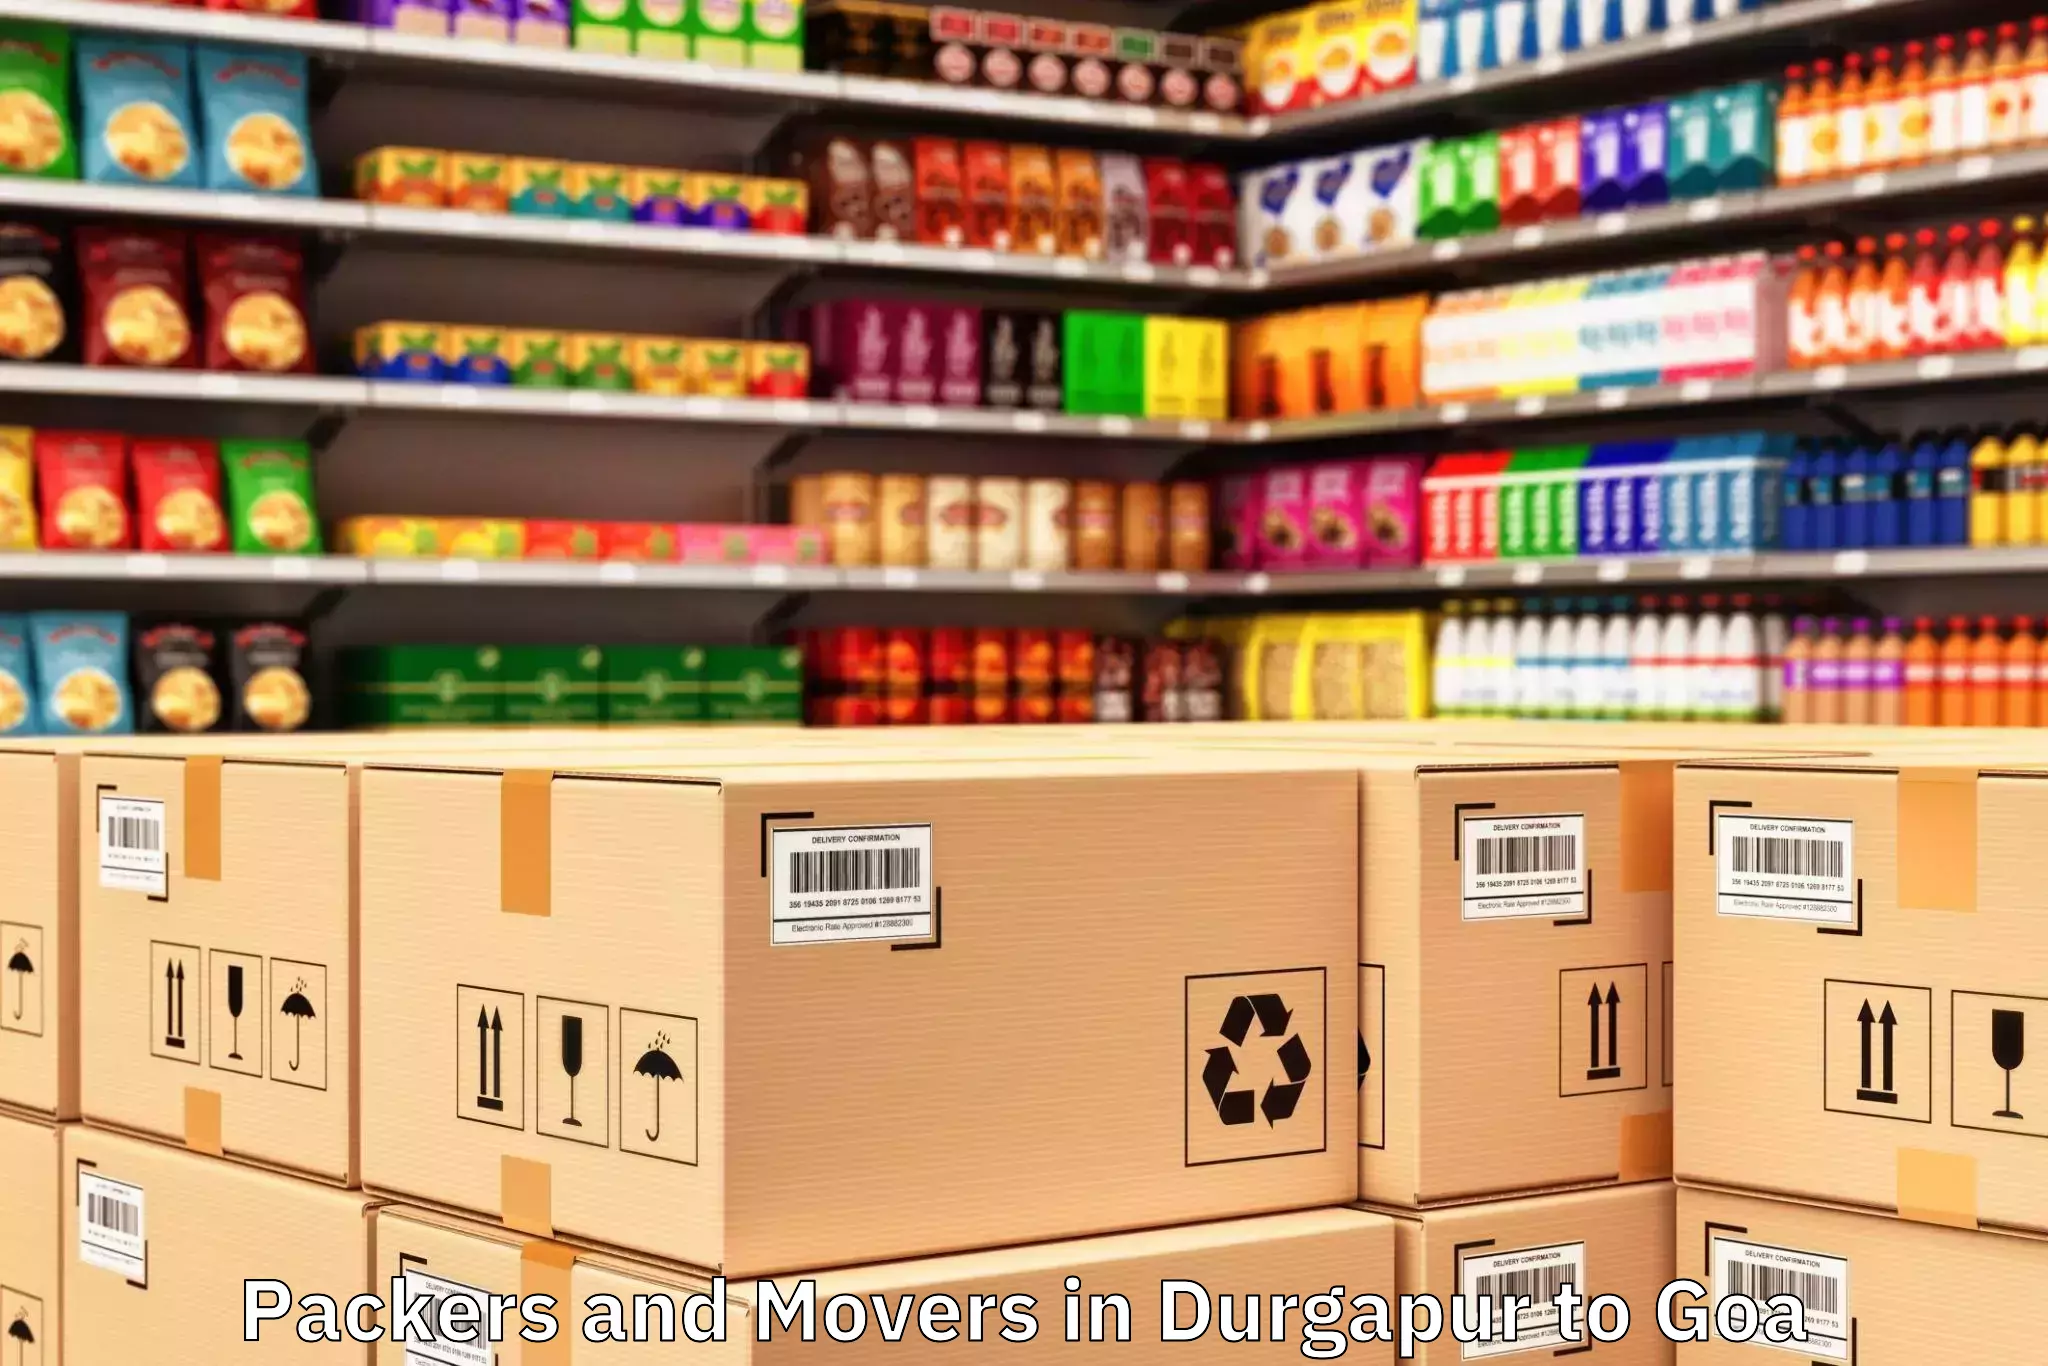 Expert Durgapur to Goa Packers And Movers